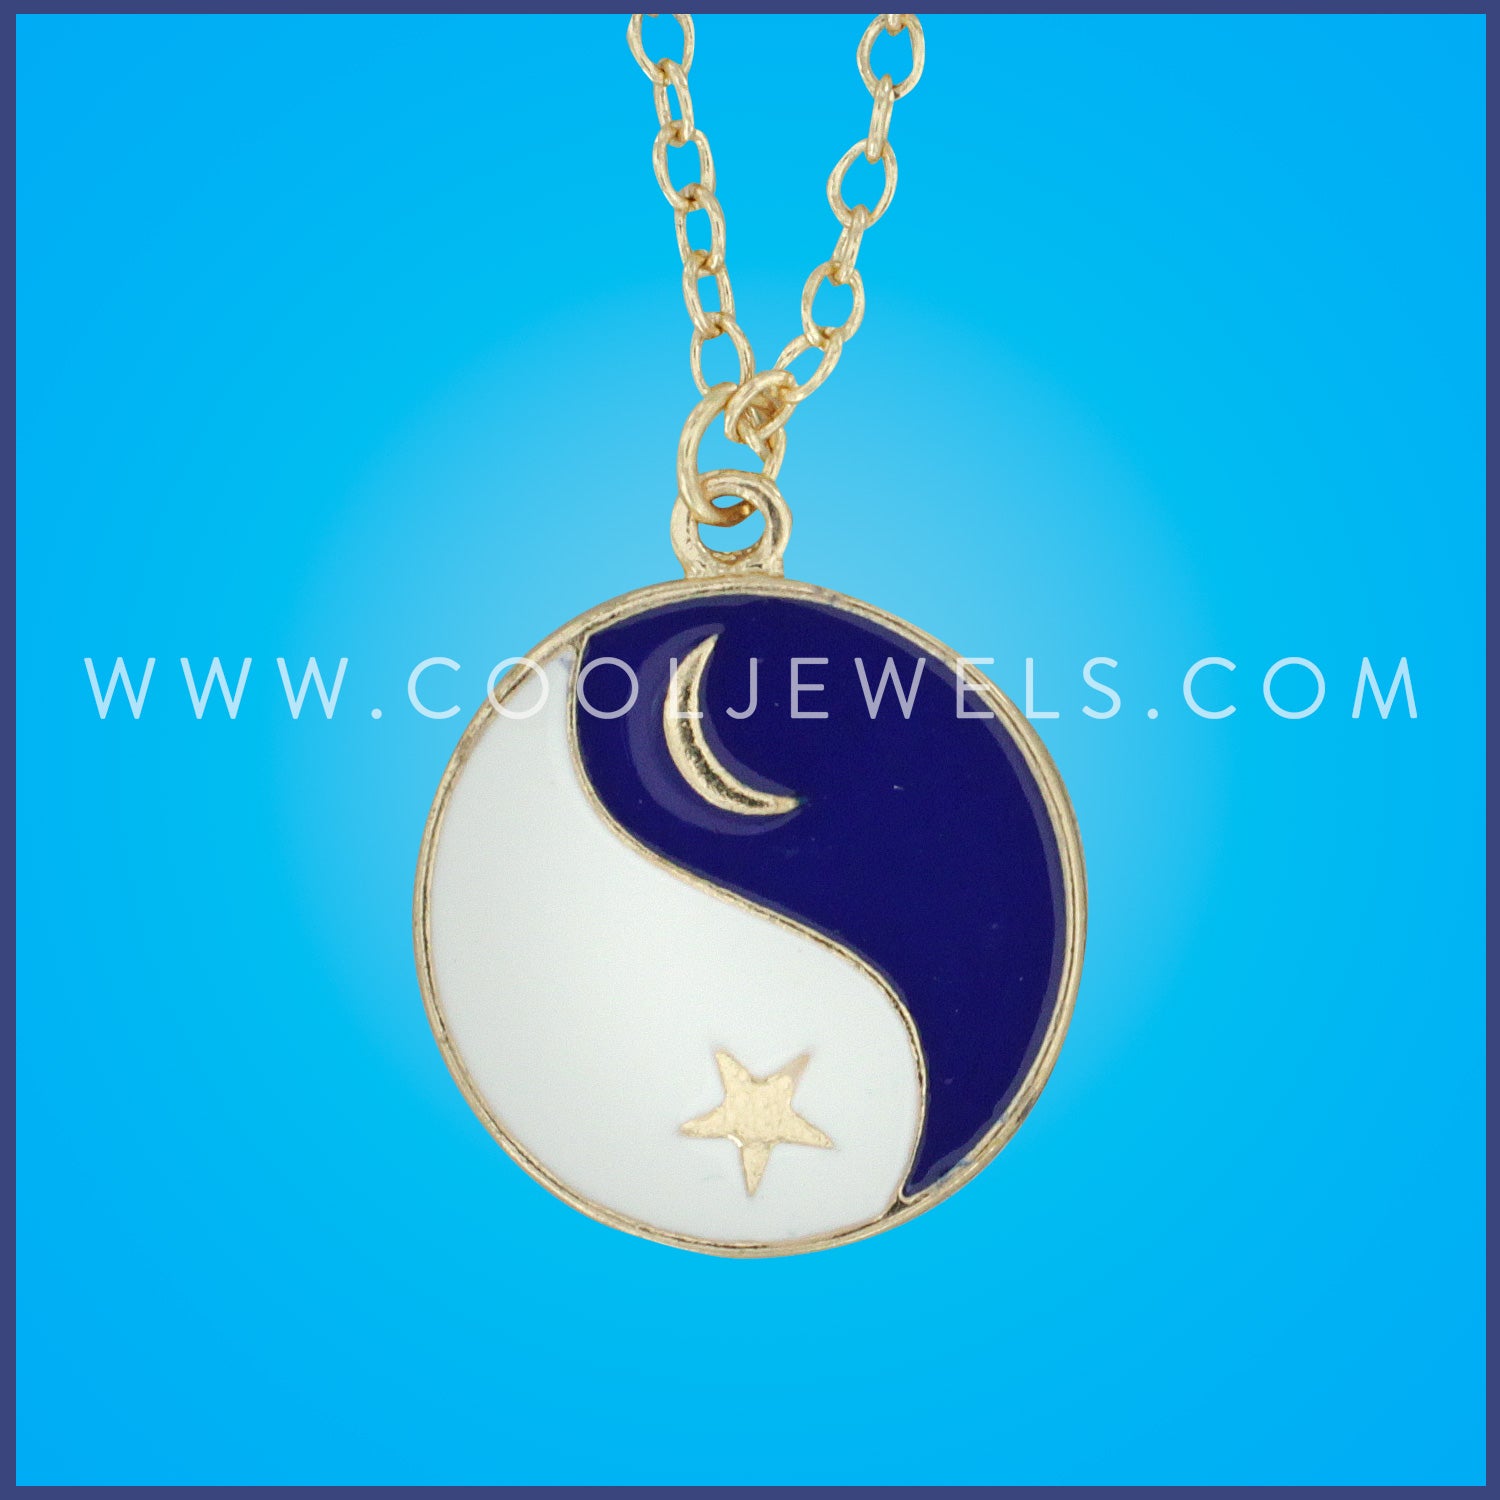 GOLD CHAIN NECKLACE WITH ROUND YIN YANG PENDANT